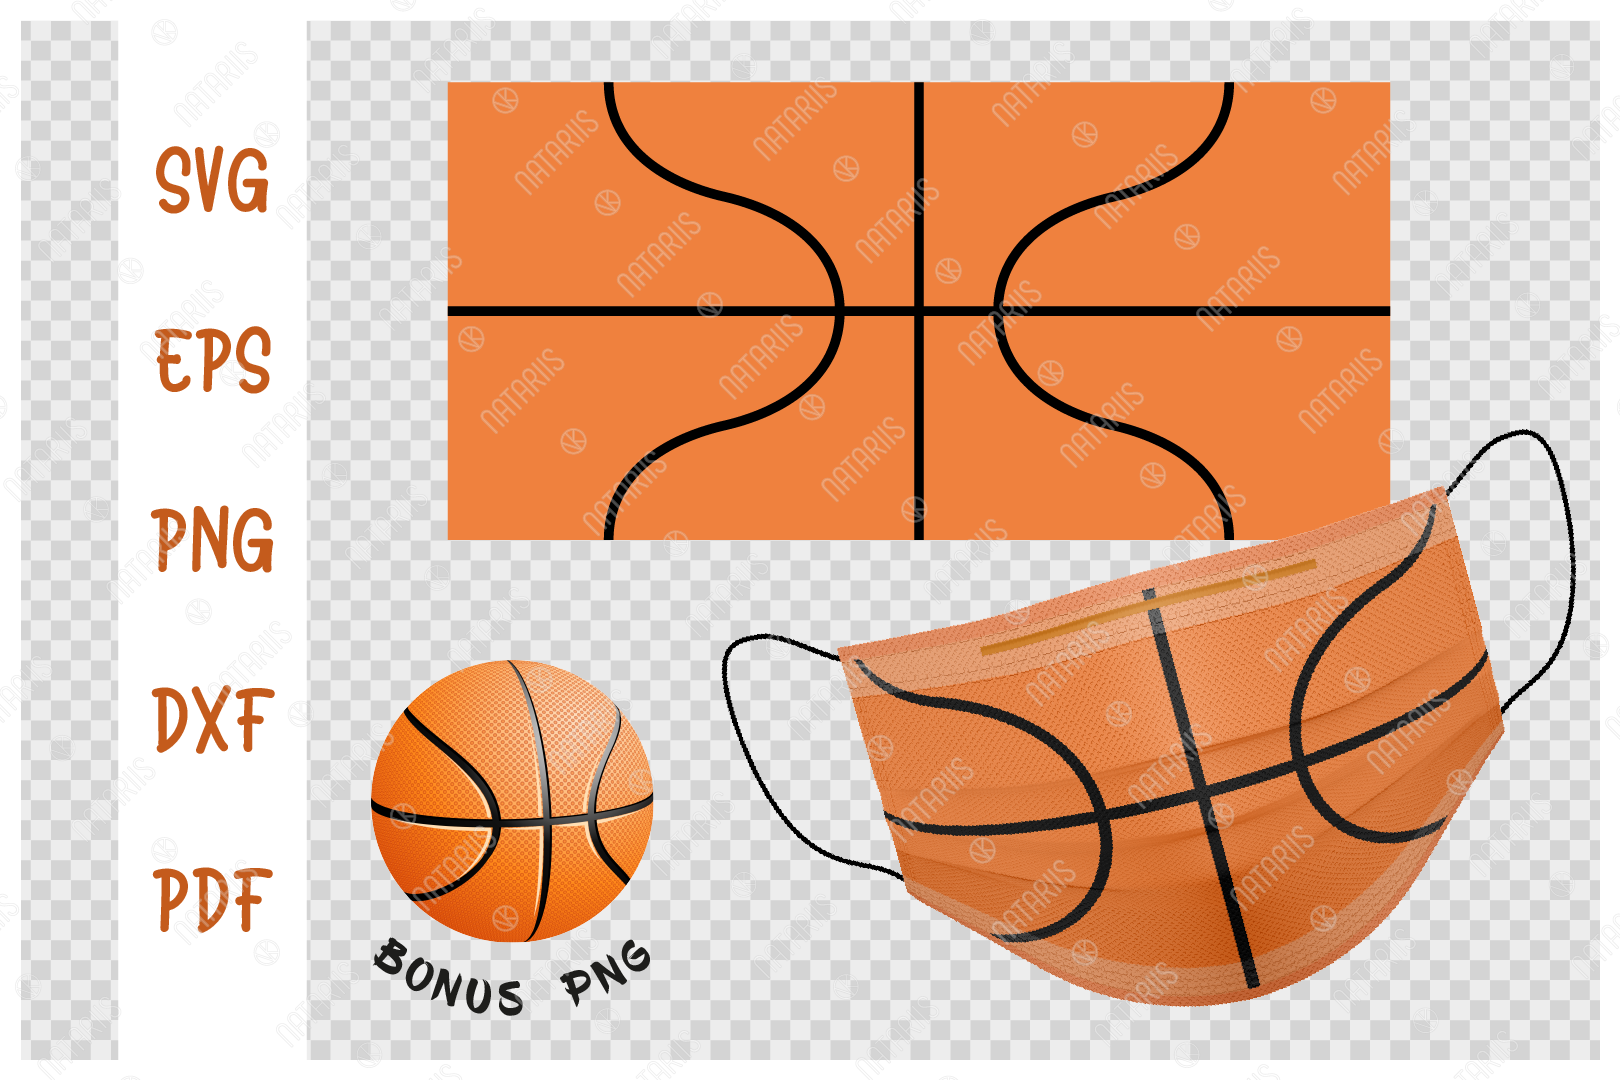 Download Svg Basketball Ball Background Design For Face Mask By Natariis Studio Thehungryjpeg Com